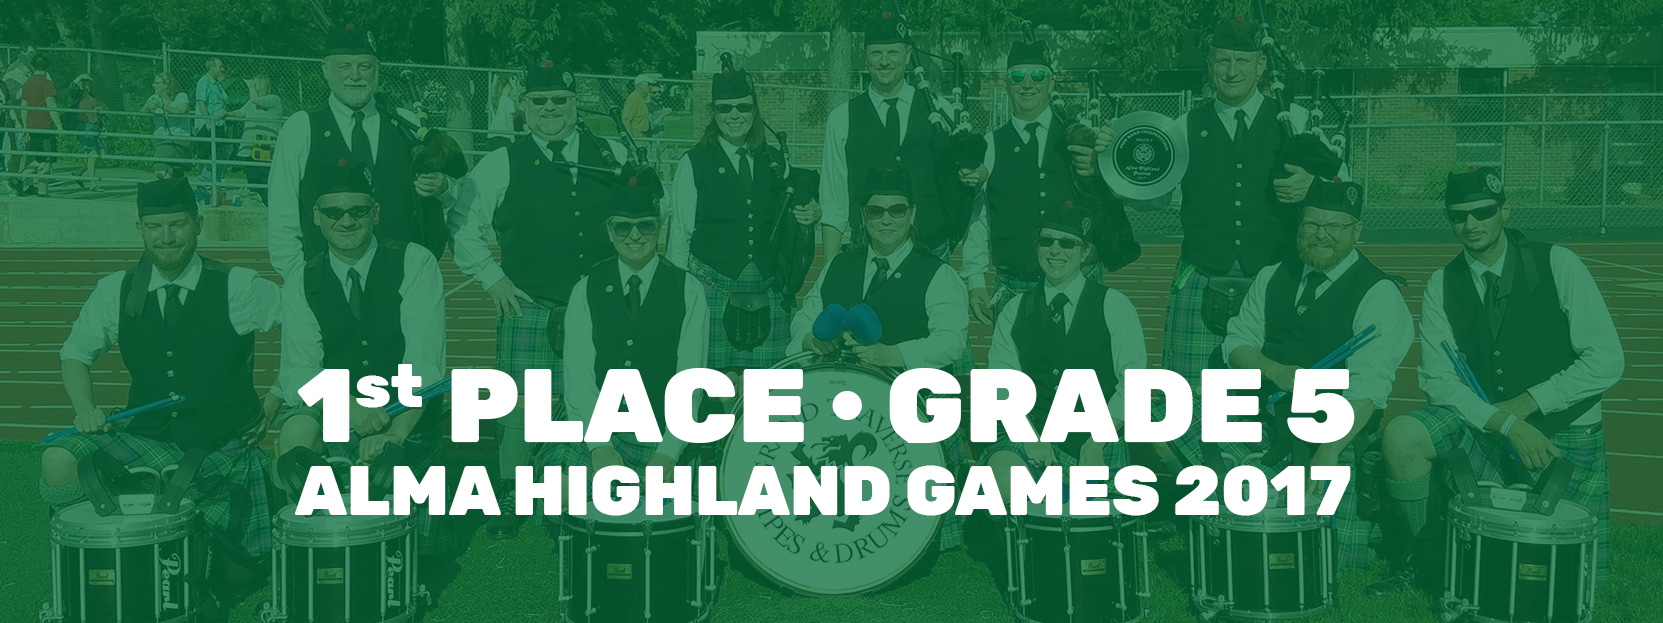 Grand Traverse Pipes & Drums 2017 1st place Alma highland games